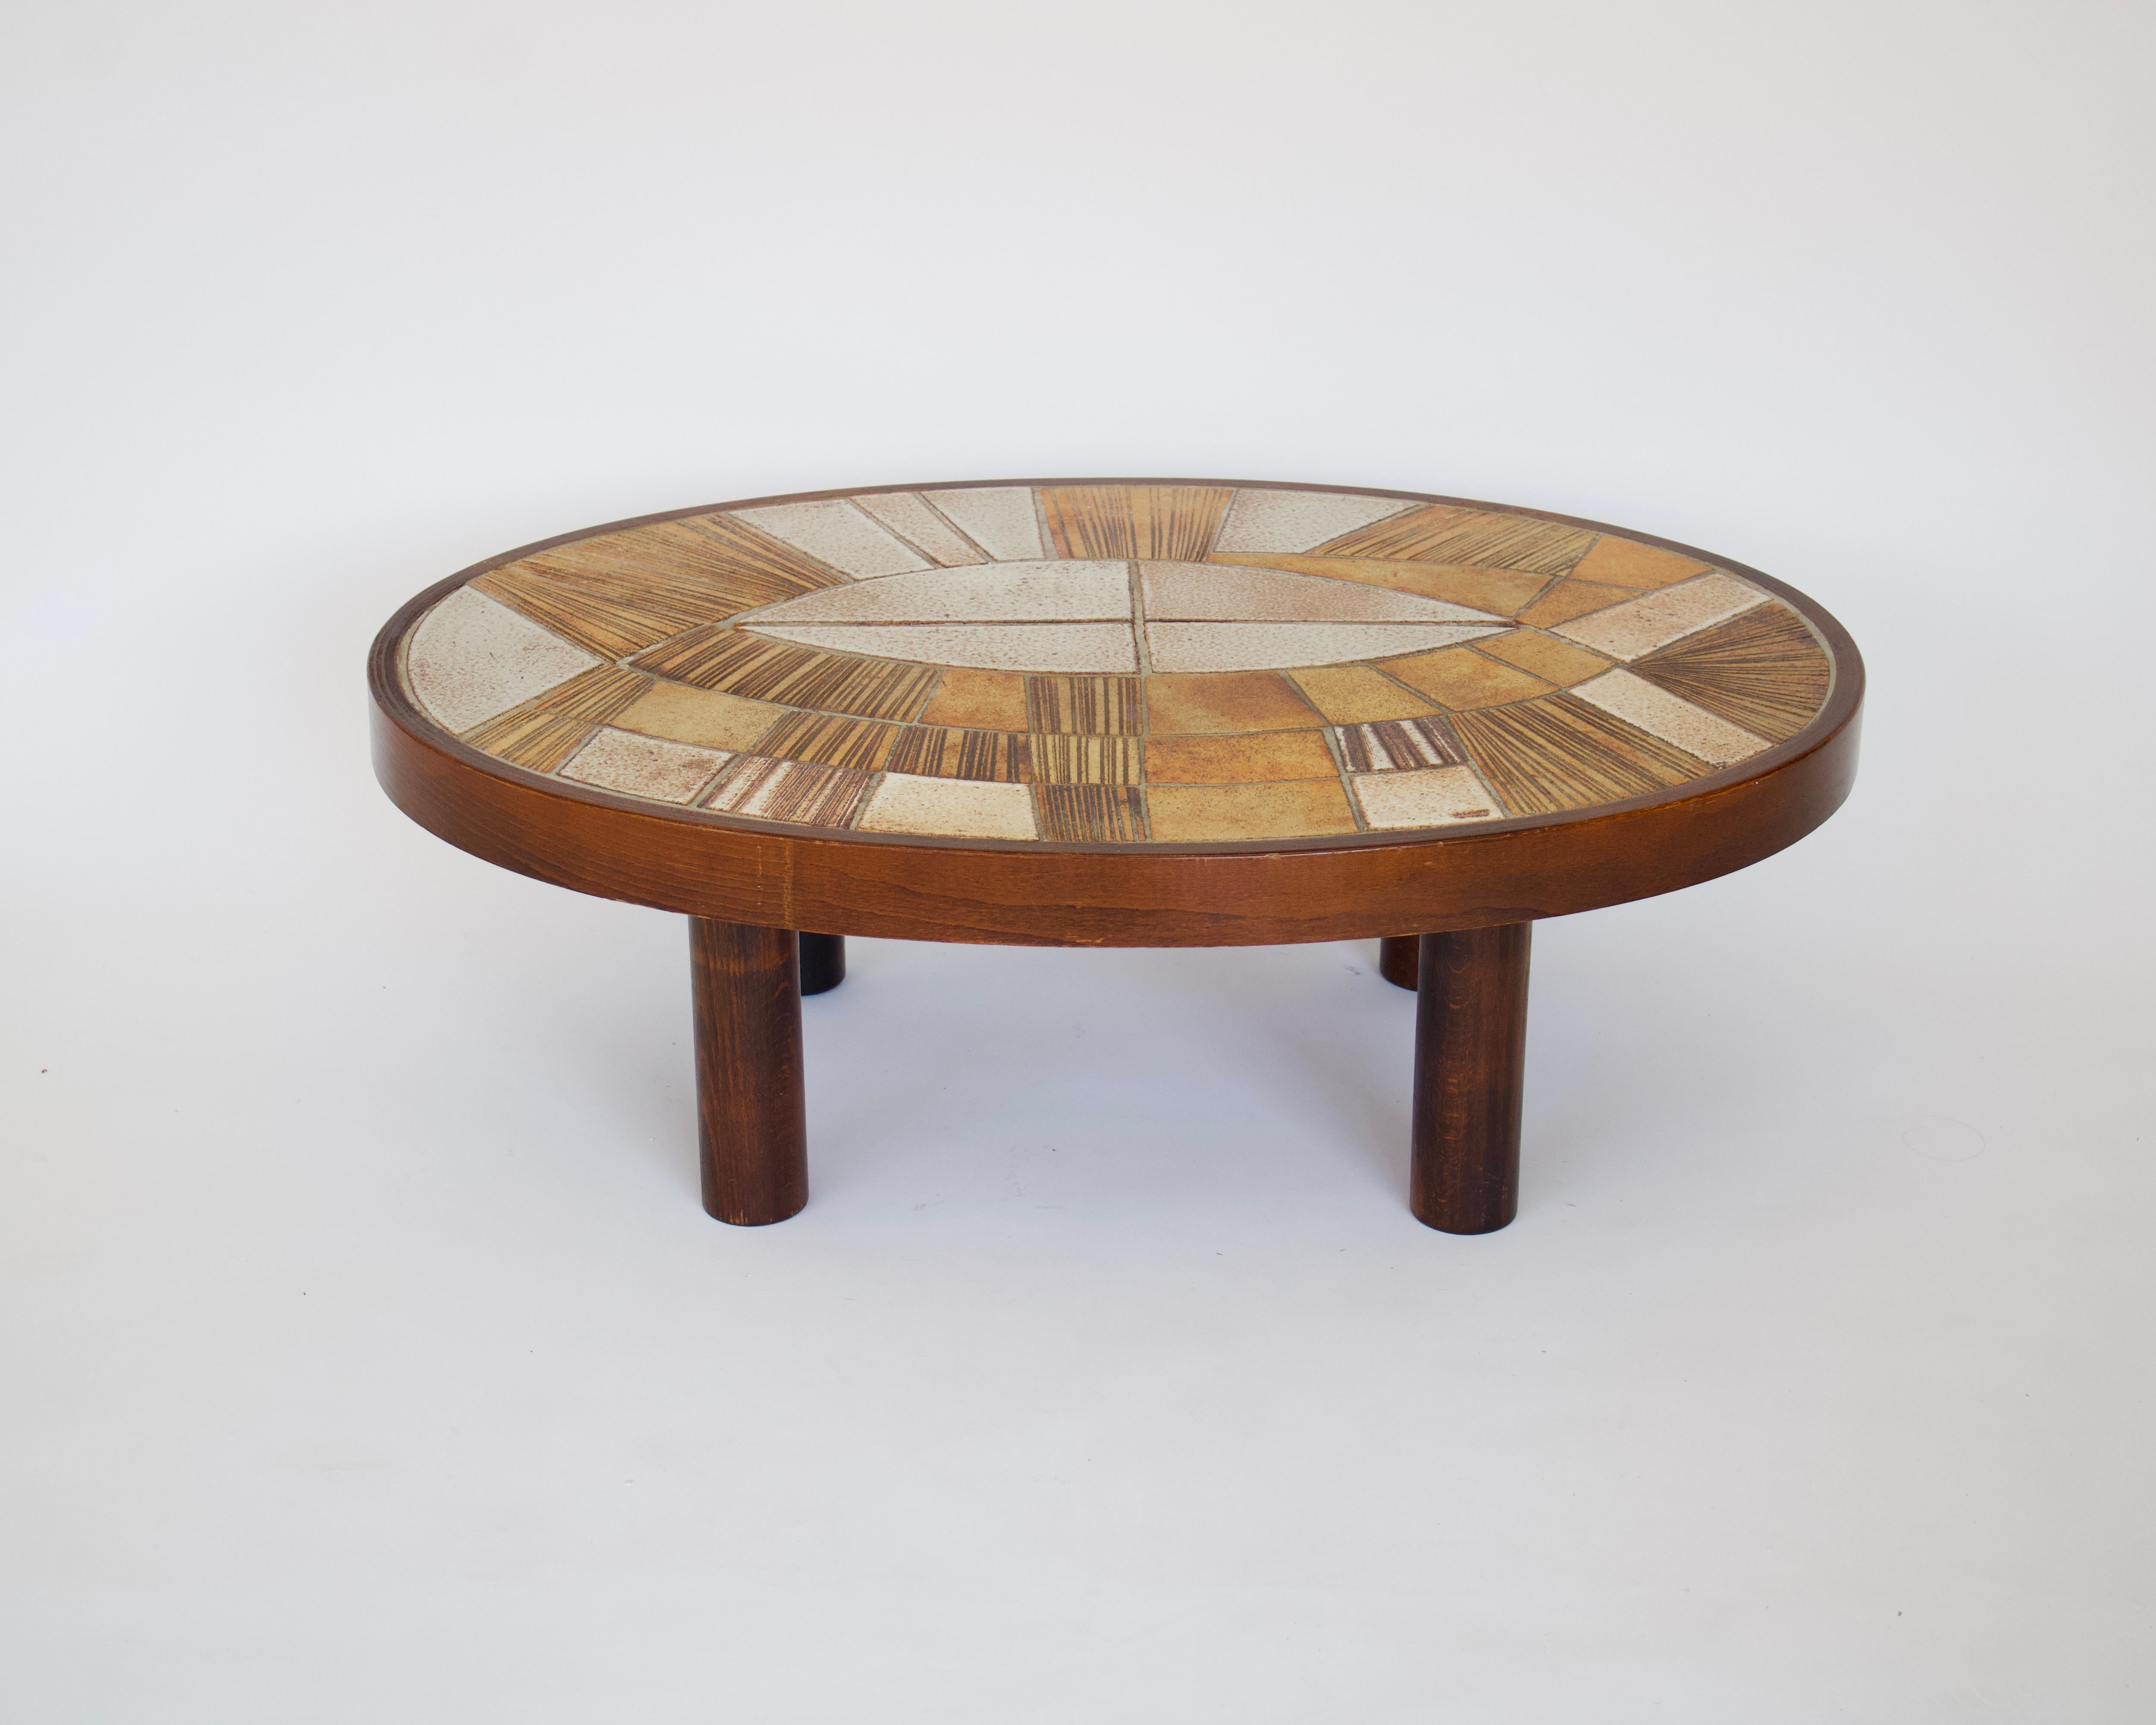 Raymond le Duc French ceramic coffee table in warm tones of browns and honey colored ceramic tiles. 
Oval table framed in mahogany with nice substantial legs. 
The tiles form an abstract drawing and have a lot of texture. 
The artist worked in